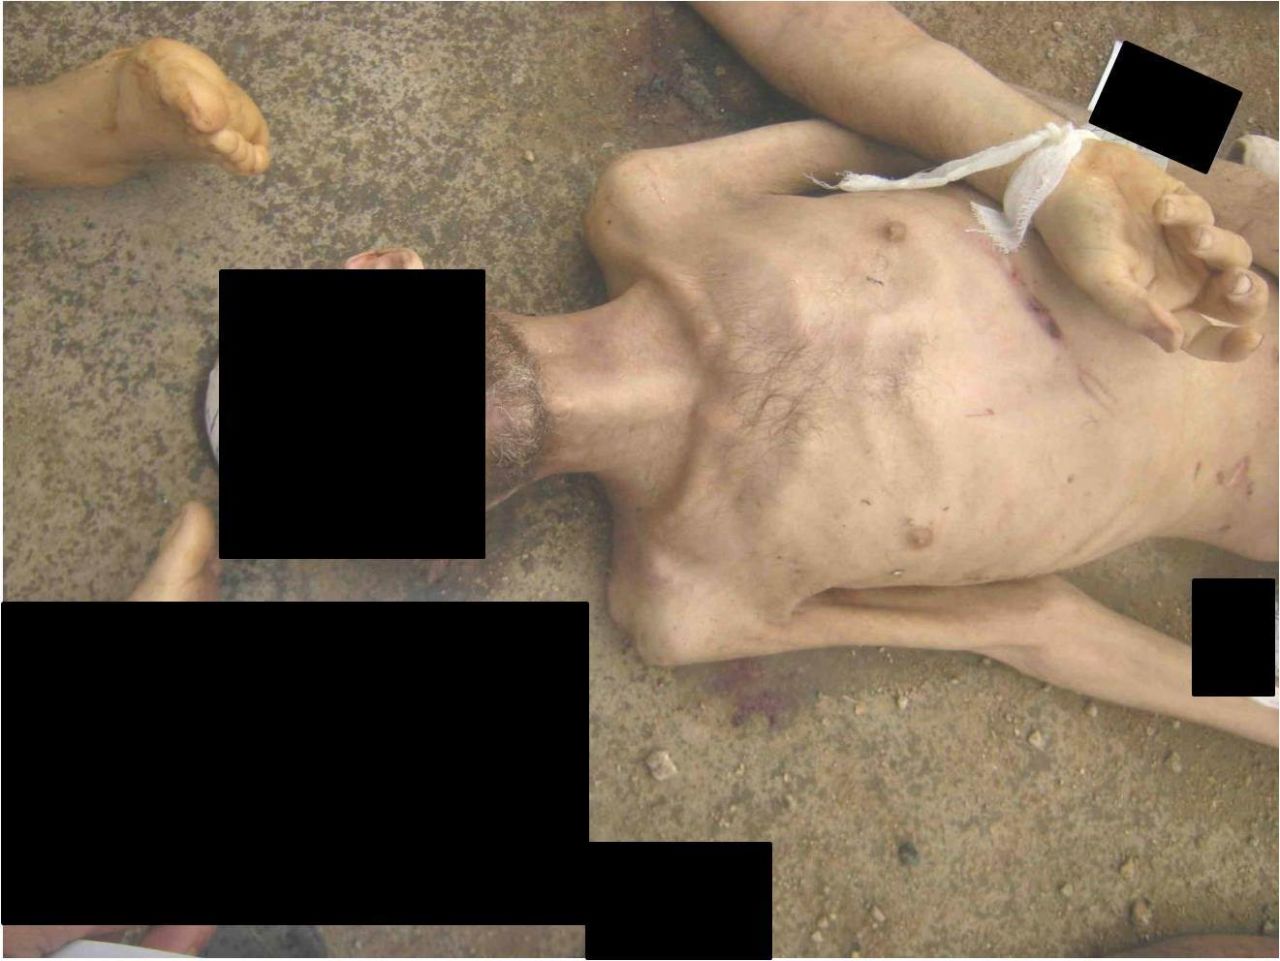 An emaciated man with marks allegedly left behind from beatings.